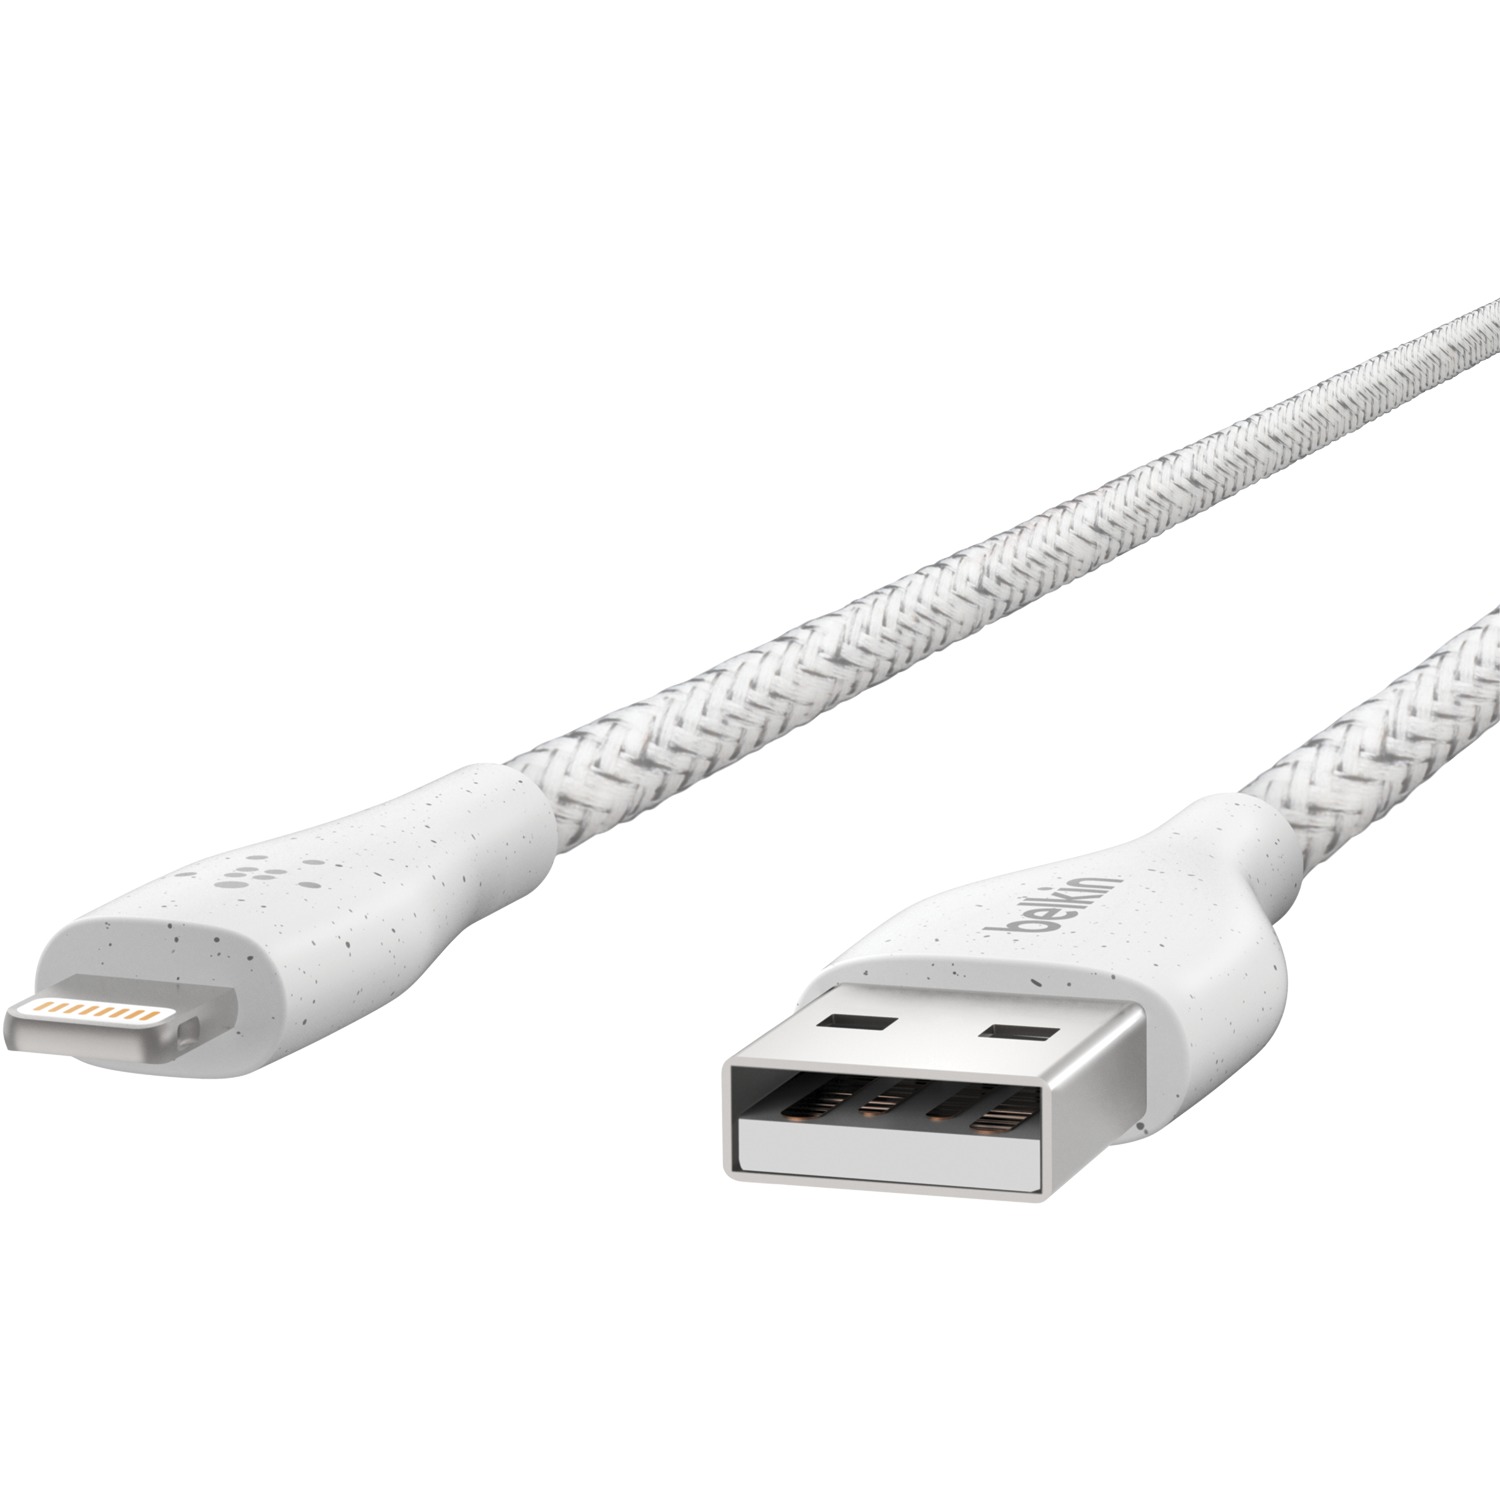 Belkin F8J236bt04-WHT DuraTek Plus Lightning to USB-A Cable, 4 Feet (White) - image 4 of 9